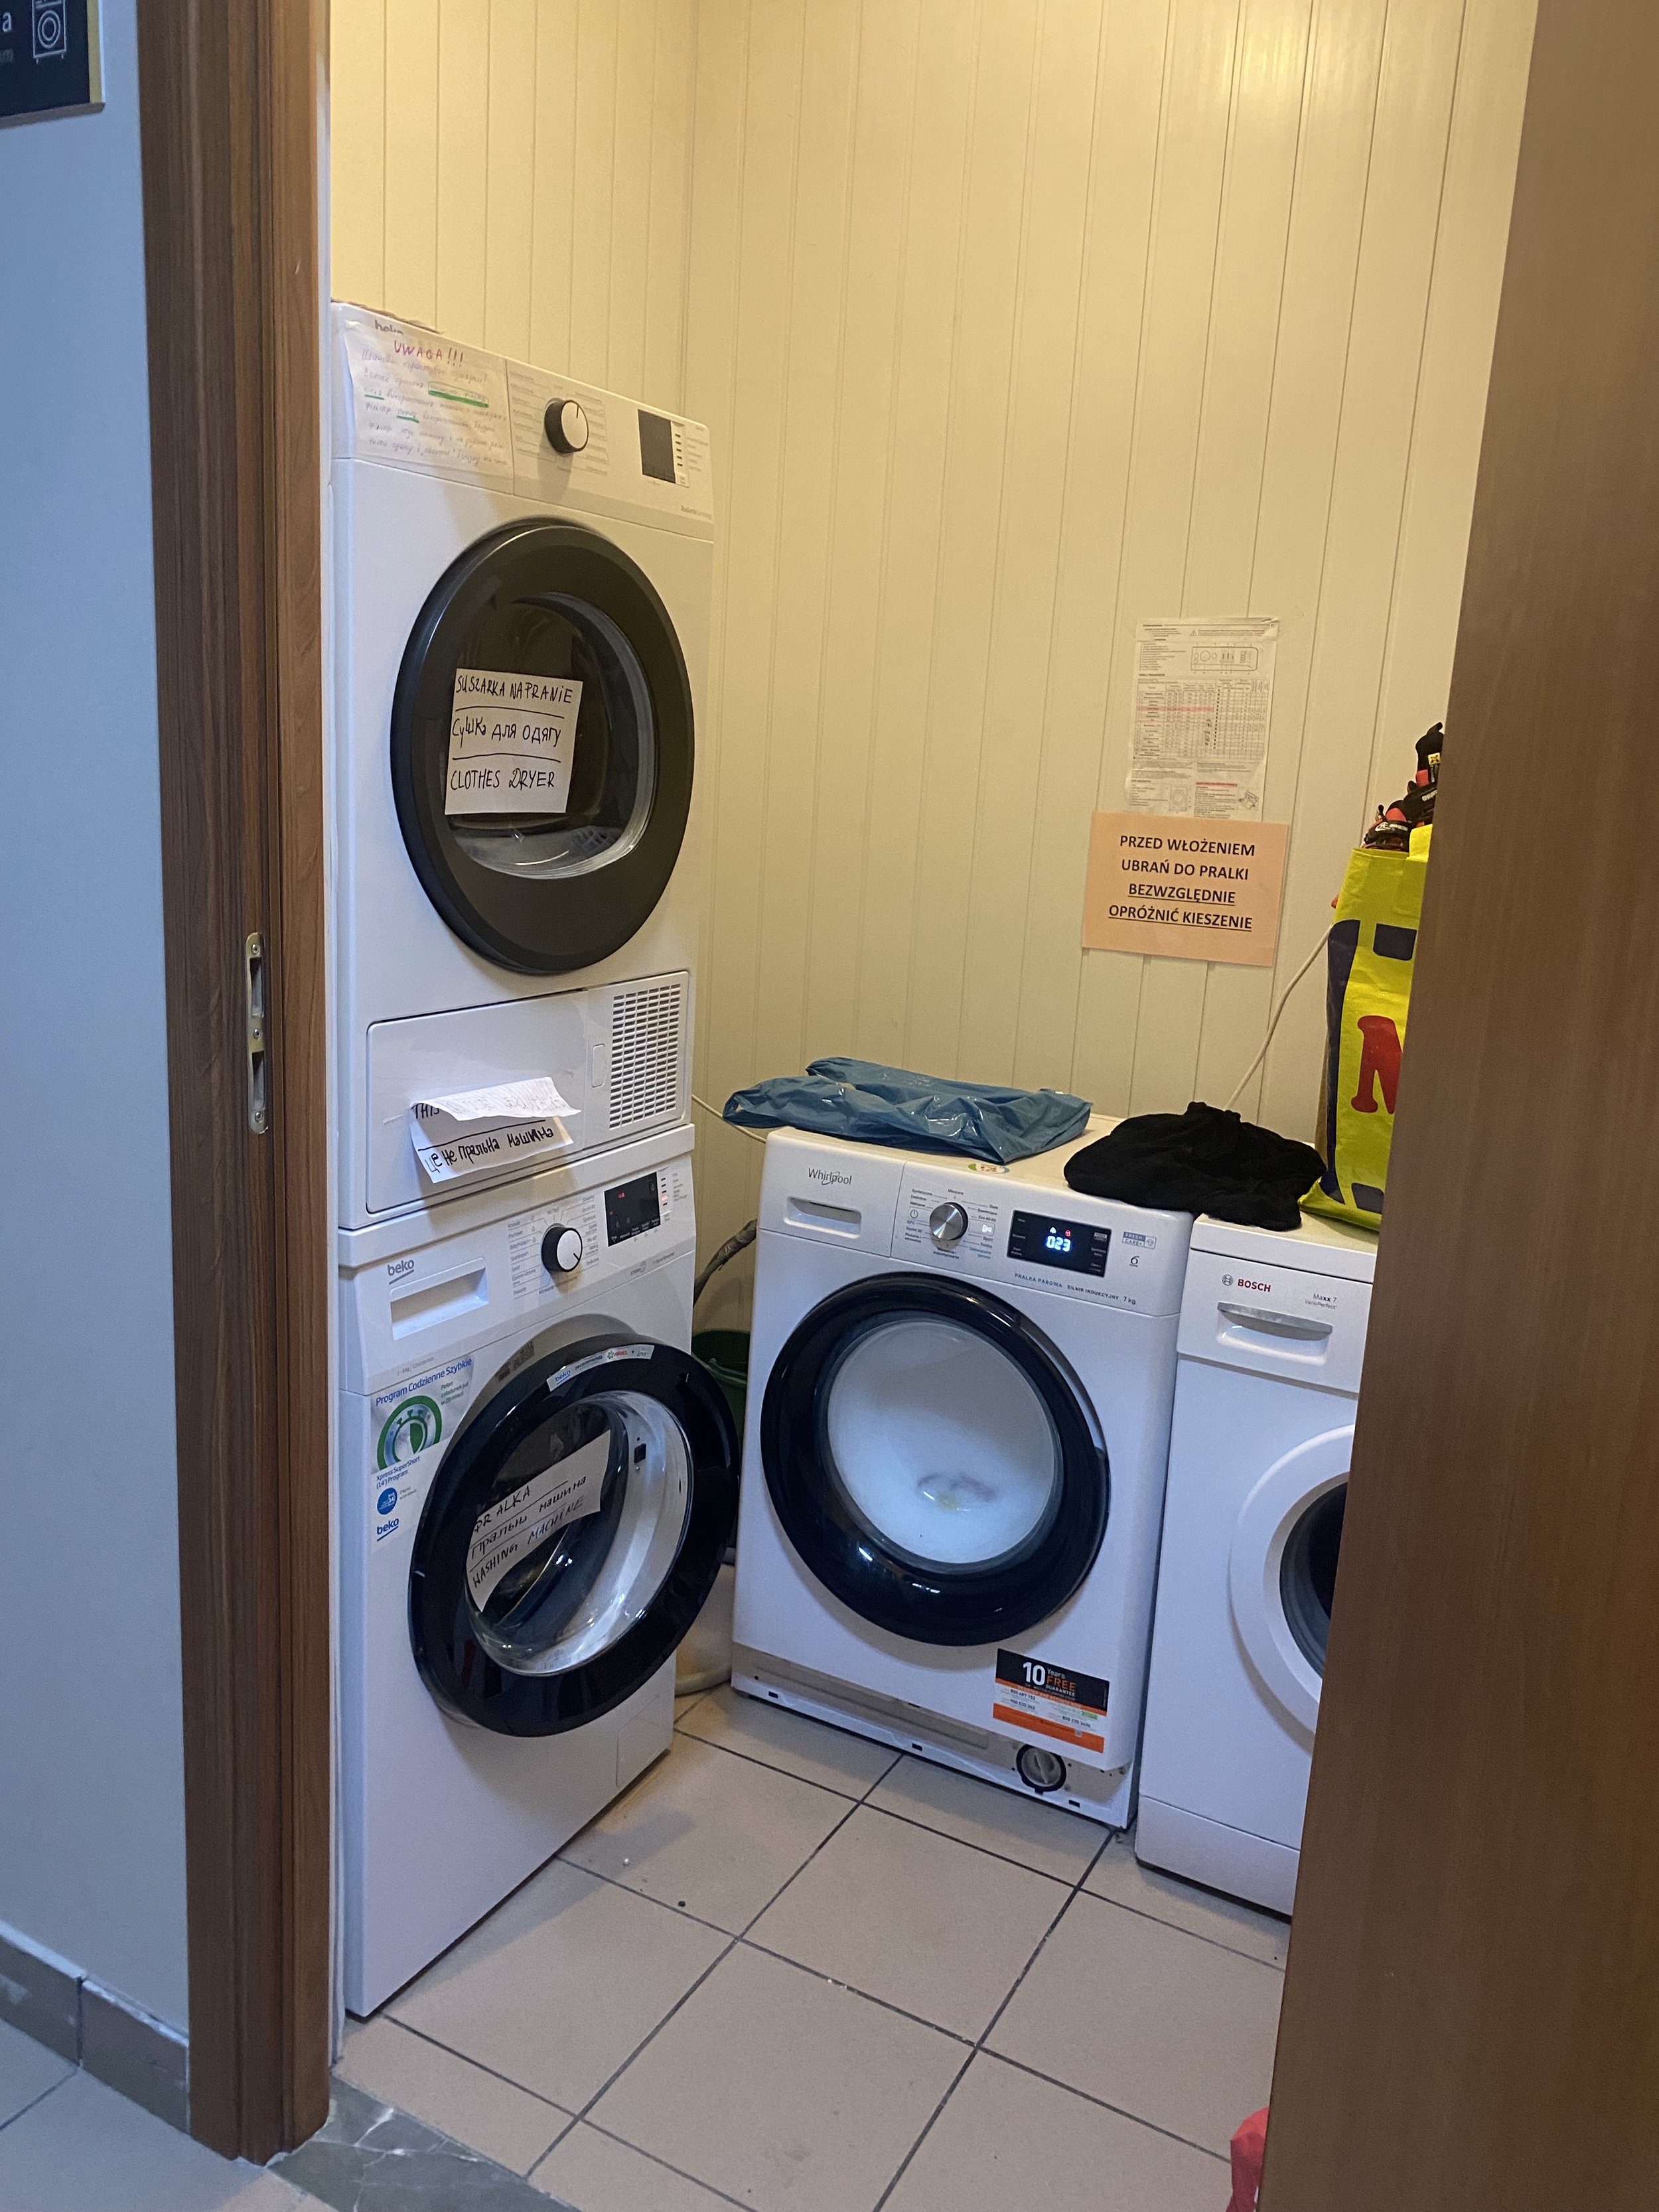 New washer and dryers and a refrigerator large enough for the families to use